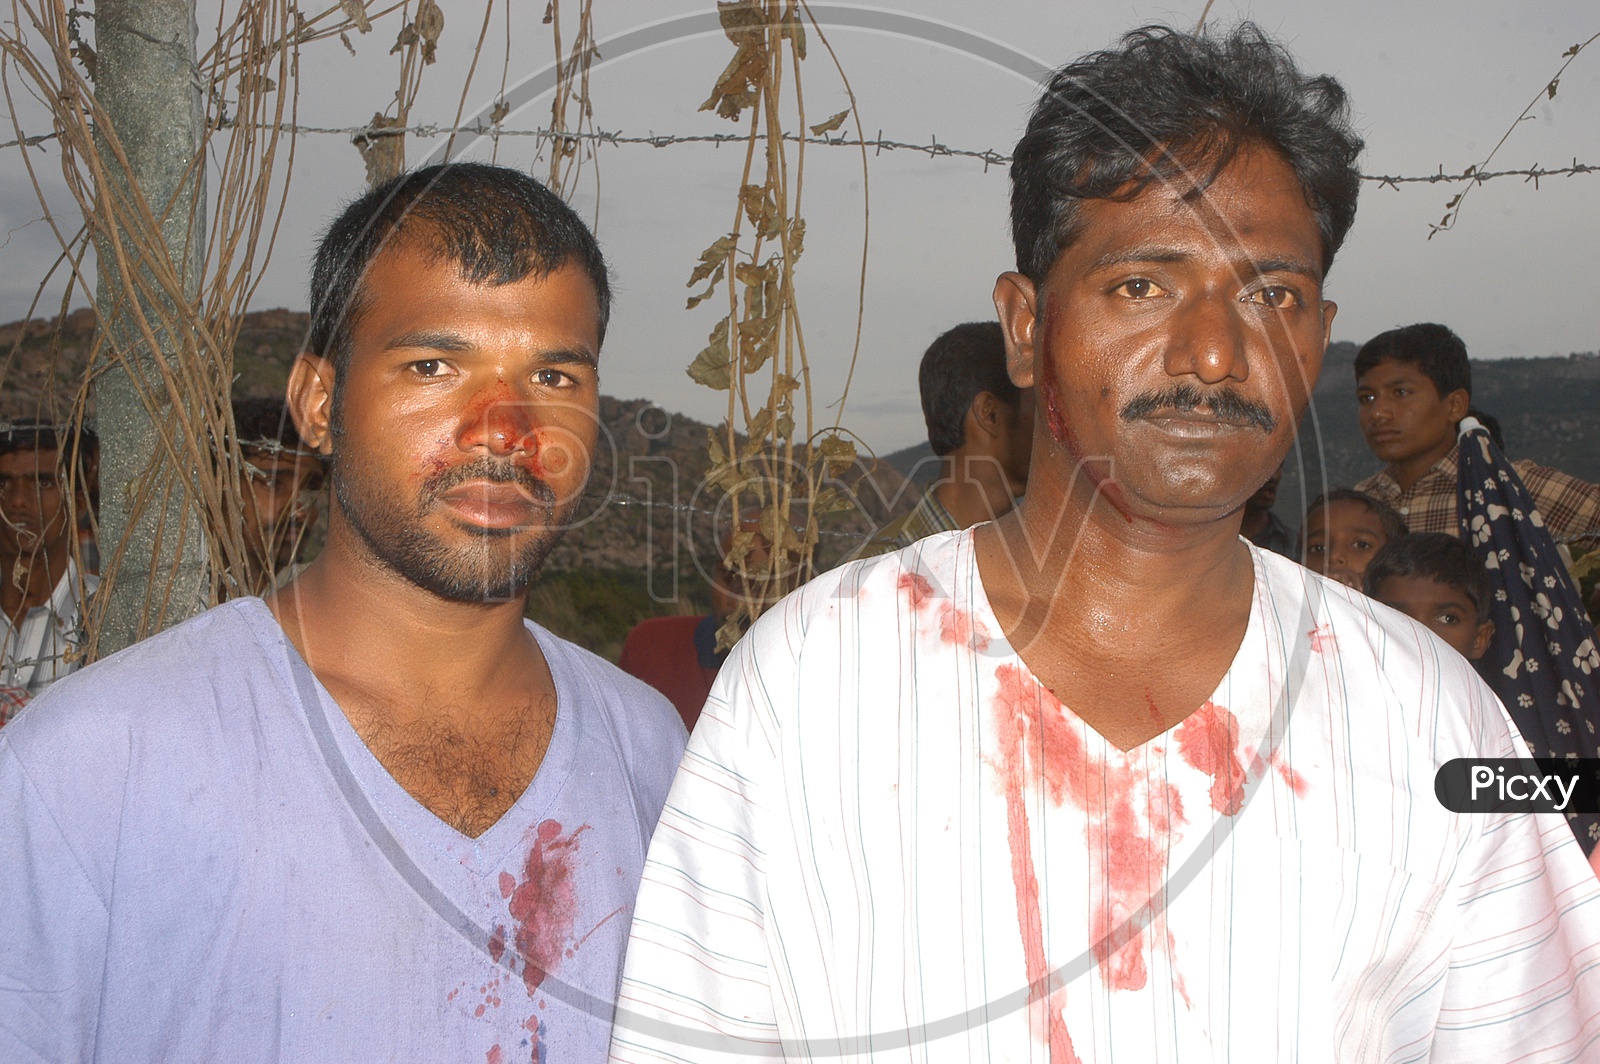 Telugu Movie Artists with Dummy Blood on Shirts while Shooting